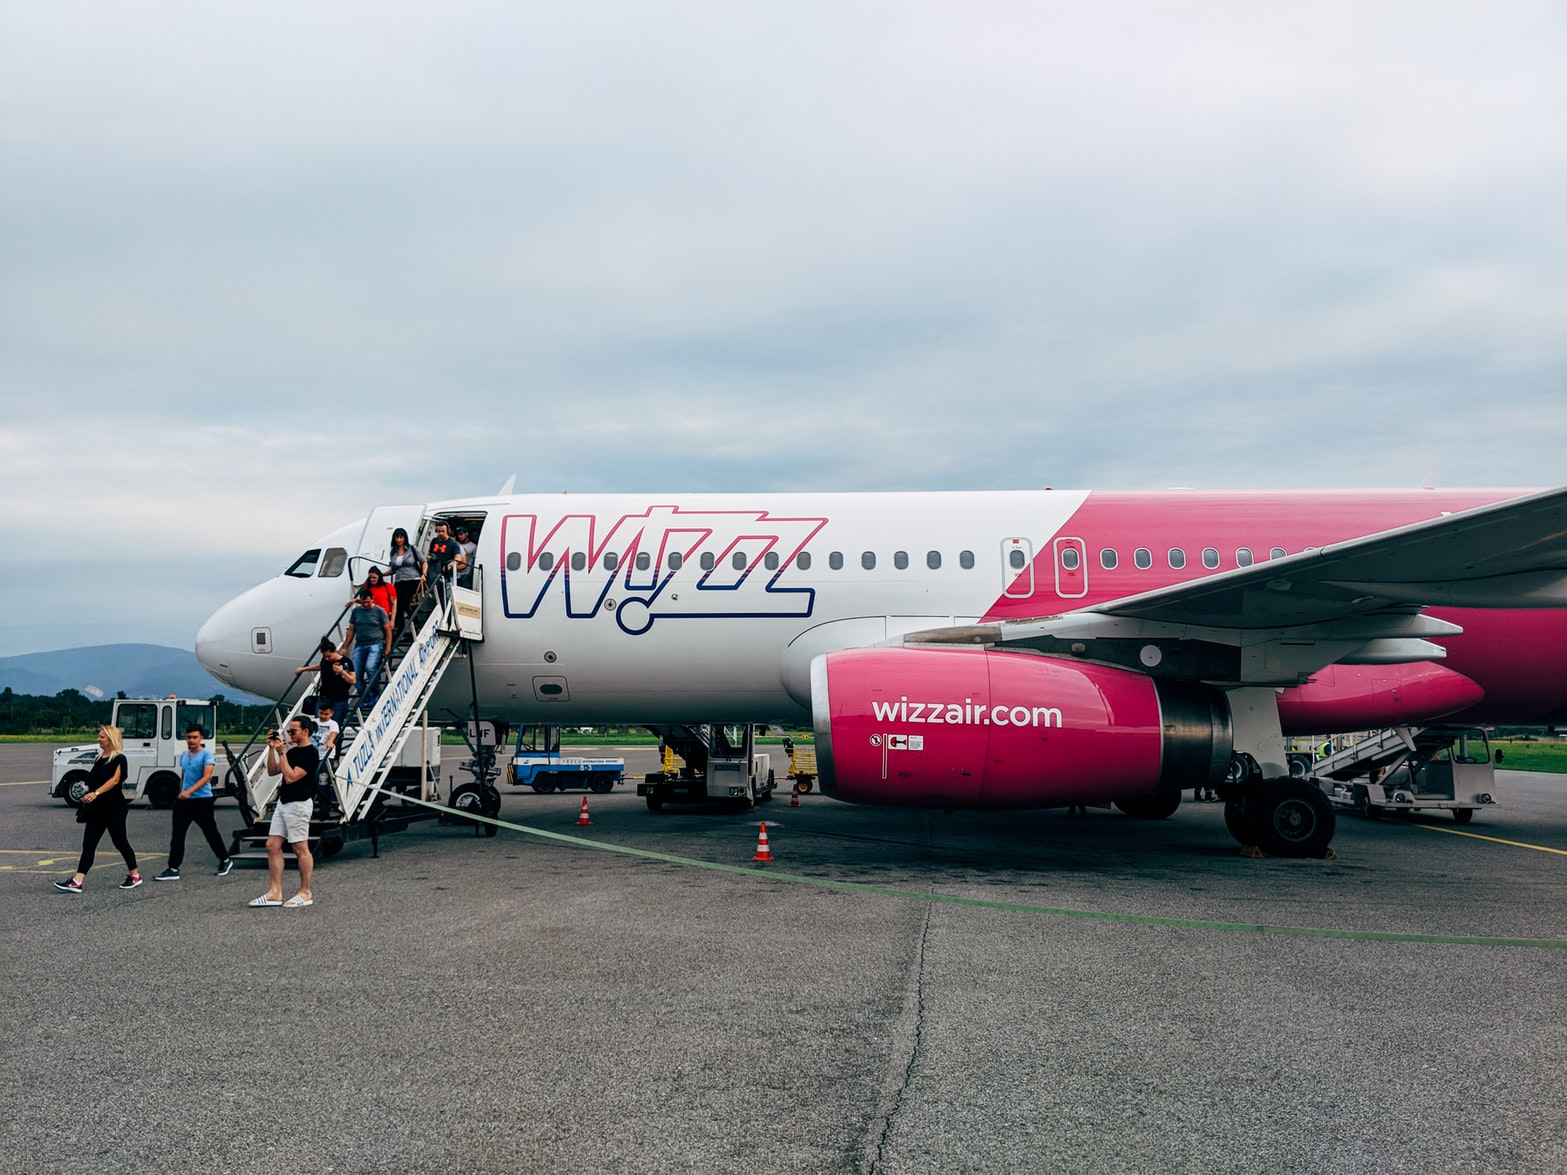 Low-Cost Flights from Hungary to Moldova Suspended Due to Security Risks